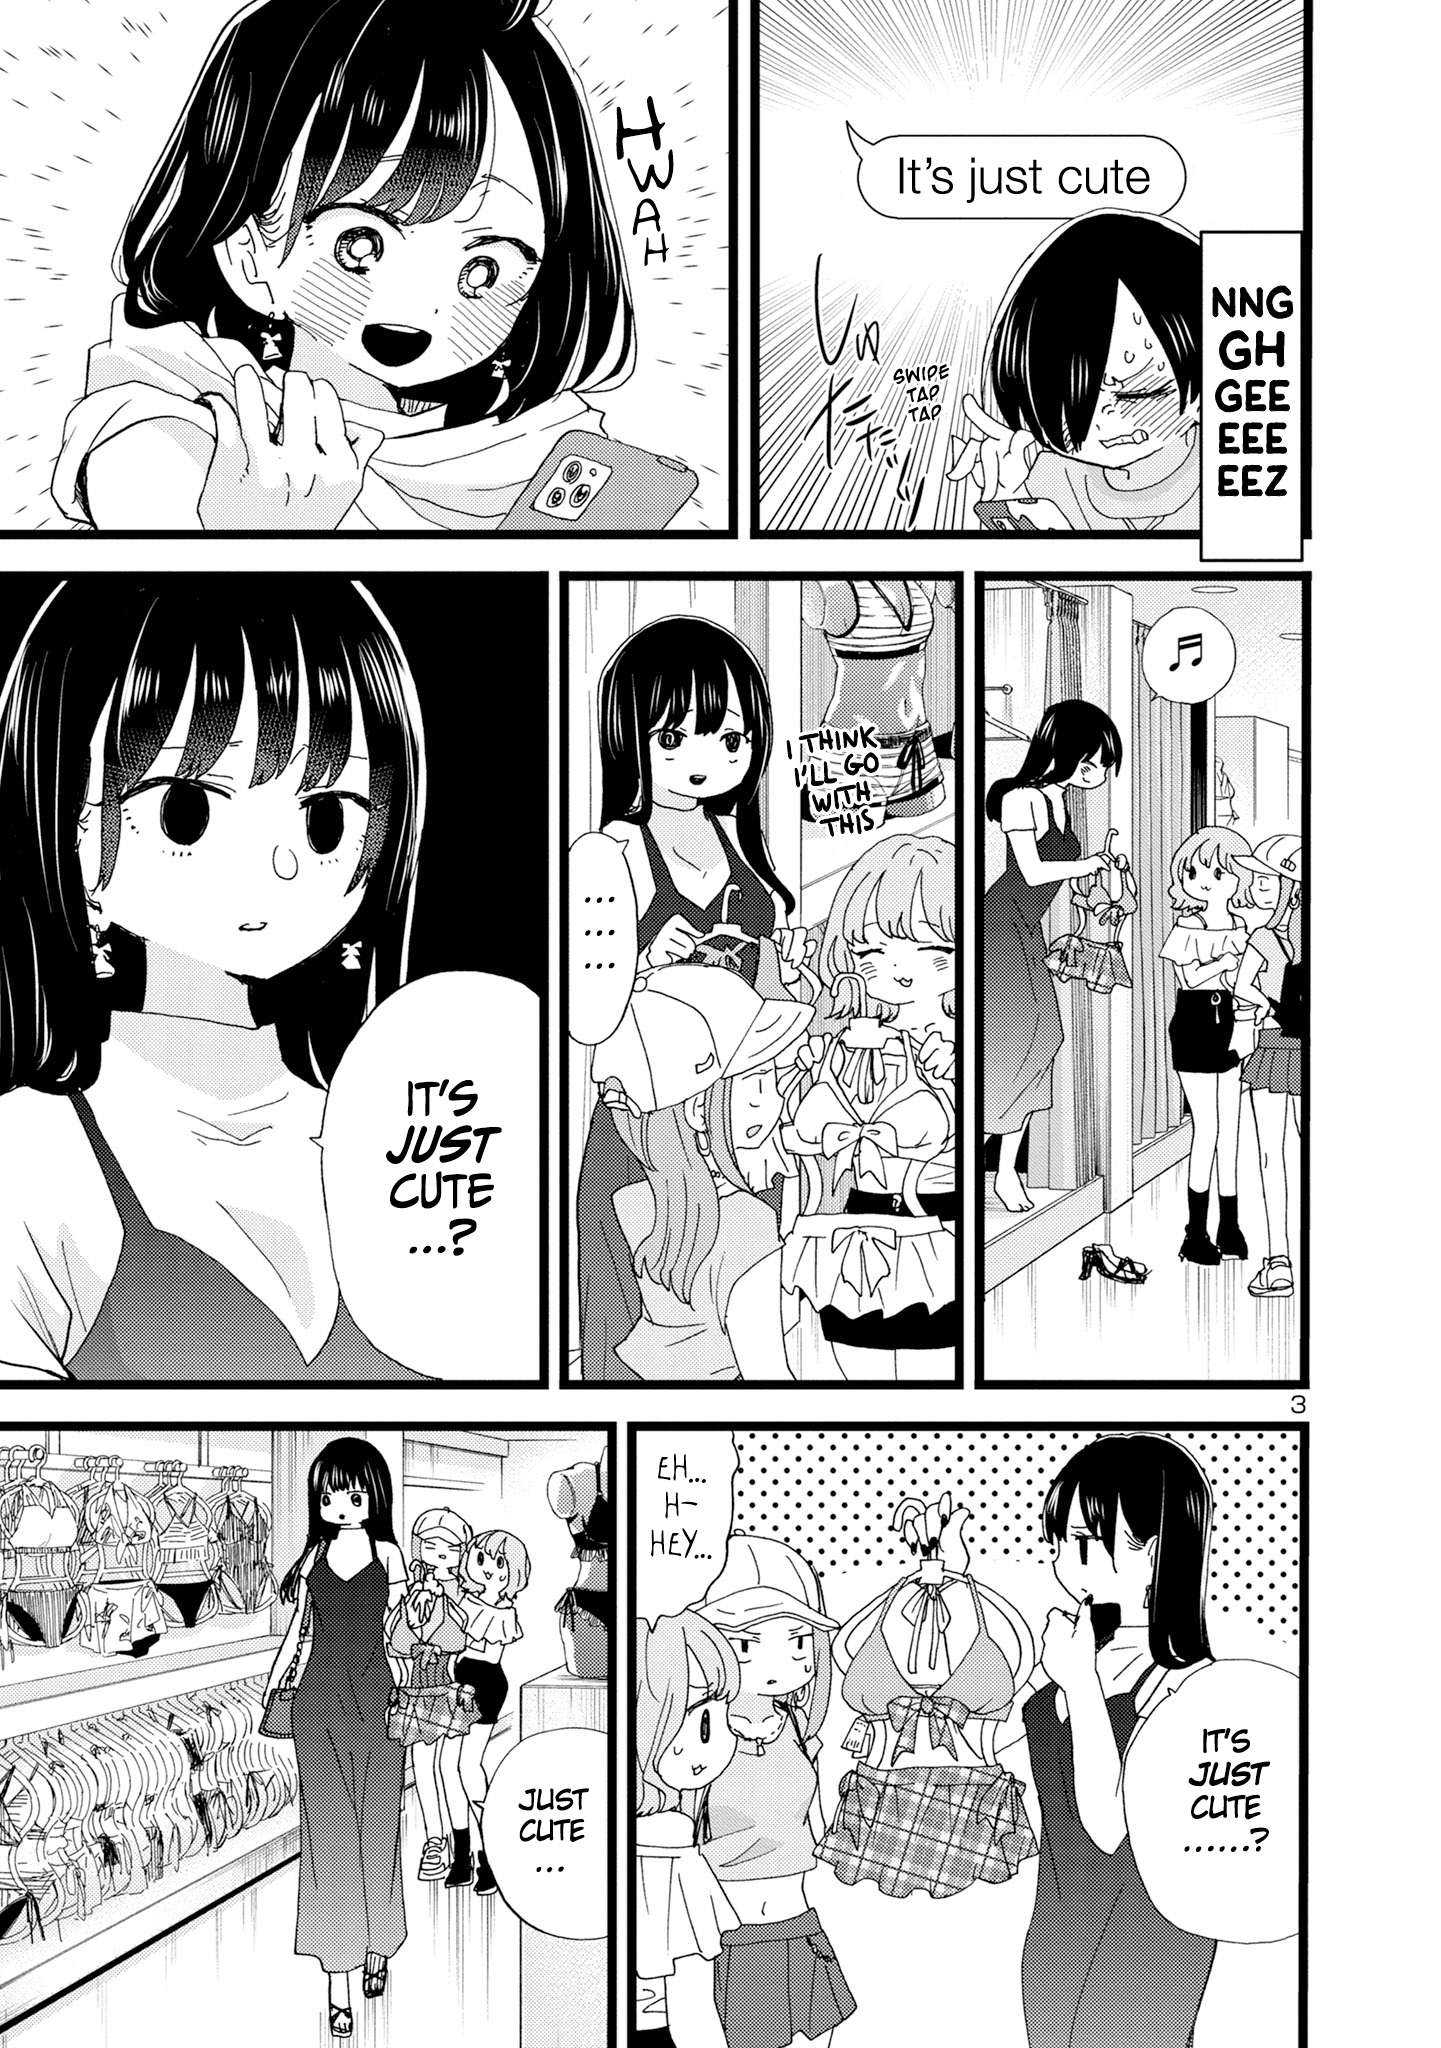 The Dangers in My Heart, Chapter 72 - The Dangers in My Heart Manga Online